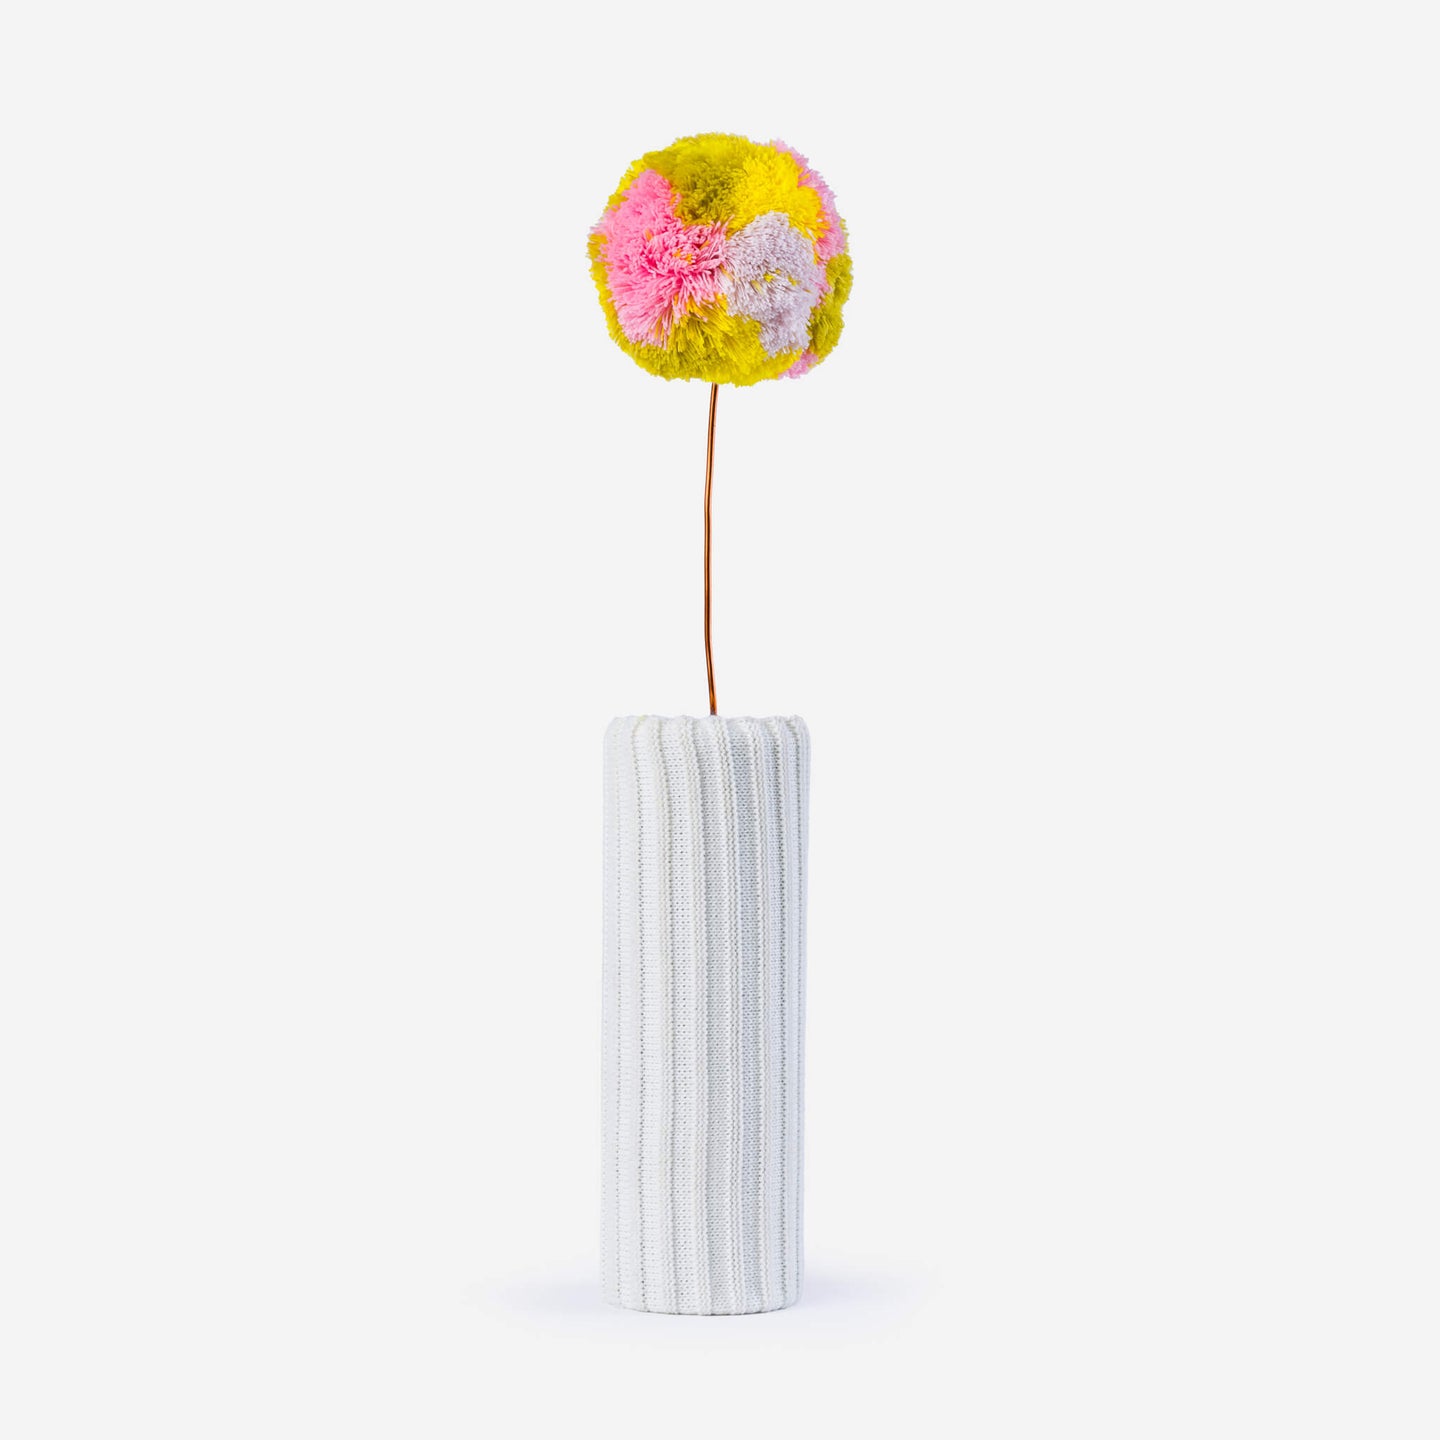 colored knitted pom pom on a wire with a white background